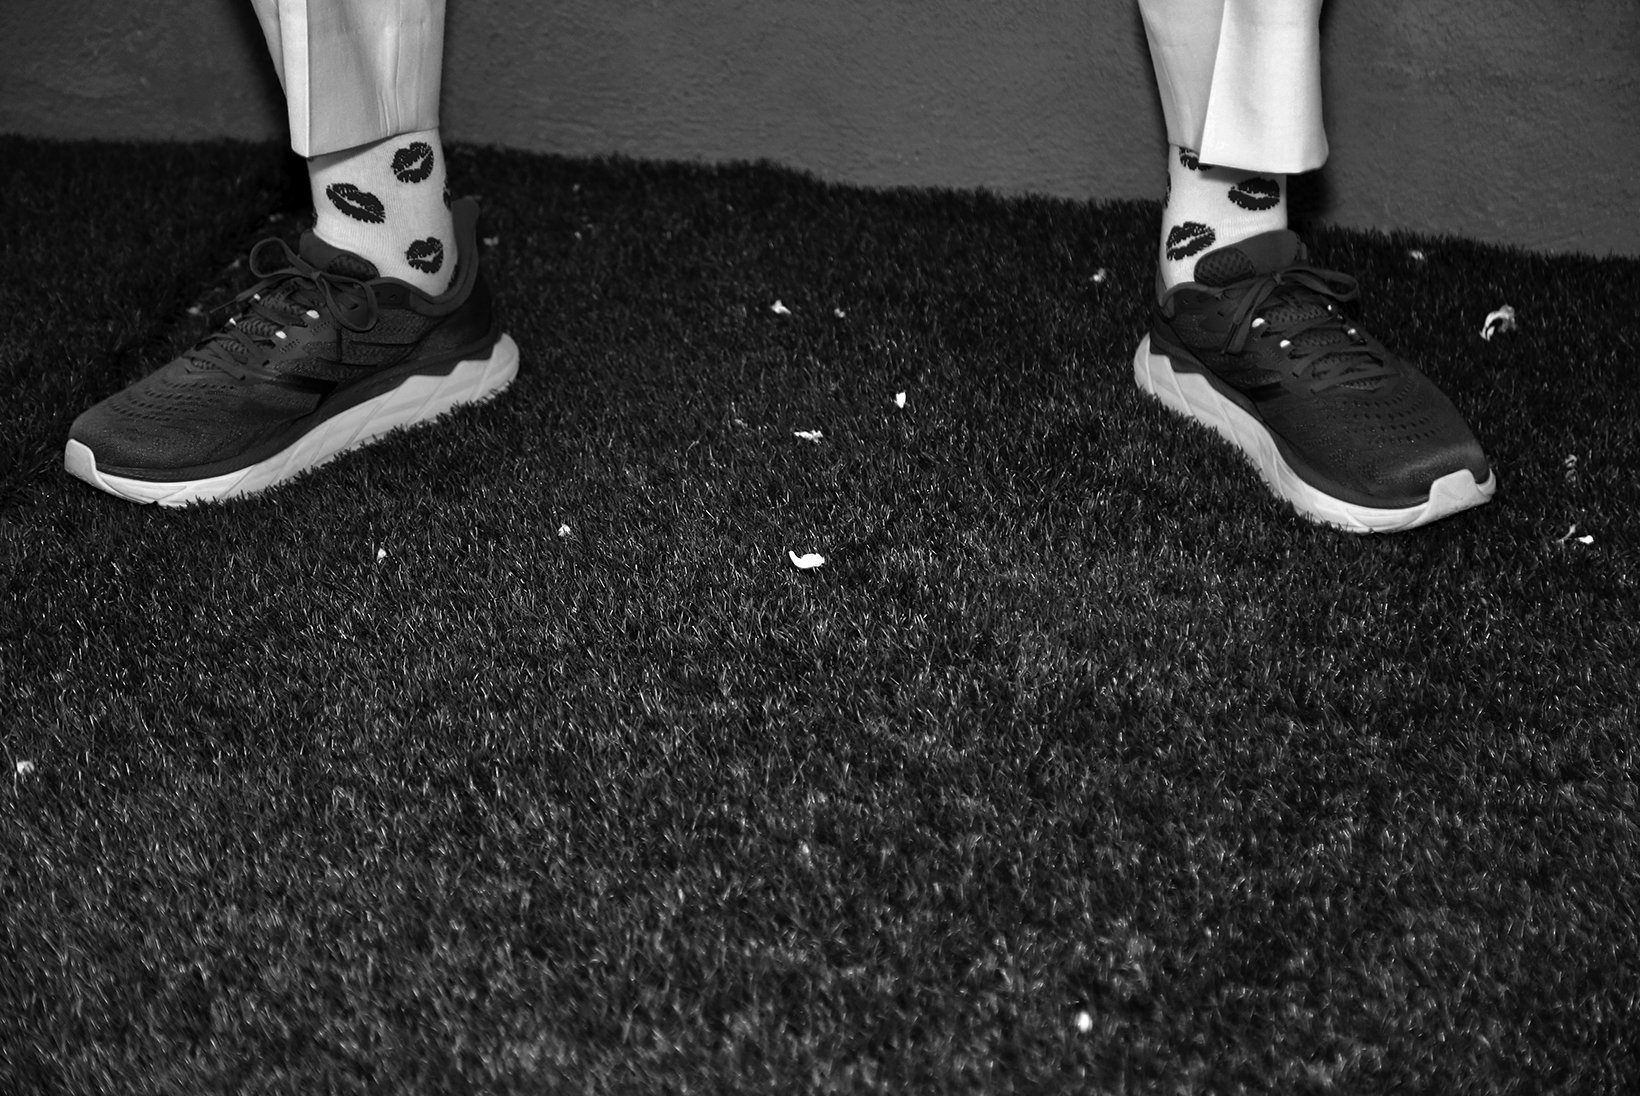 Close-up of a pair of men’s sneakers on the grass. The bottom part of his pants reach just above his ankles fully displaying white socks with a kissing-lips design.